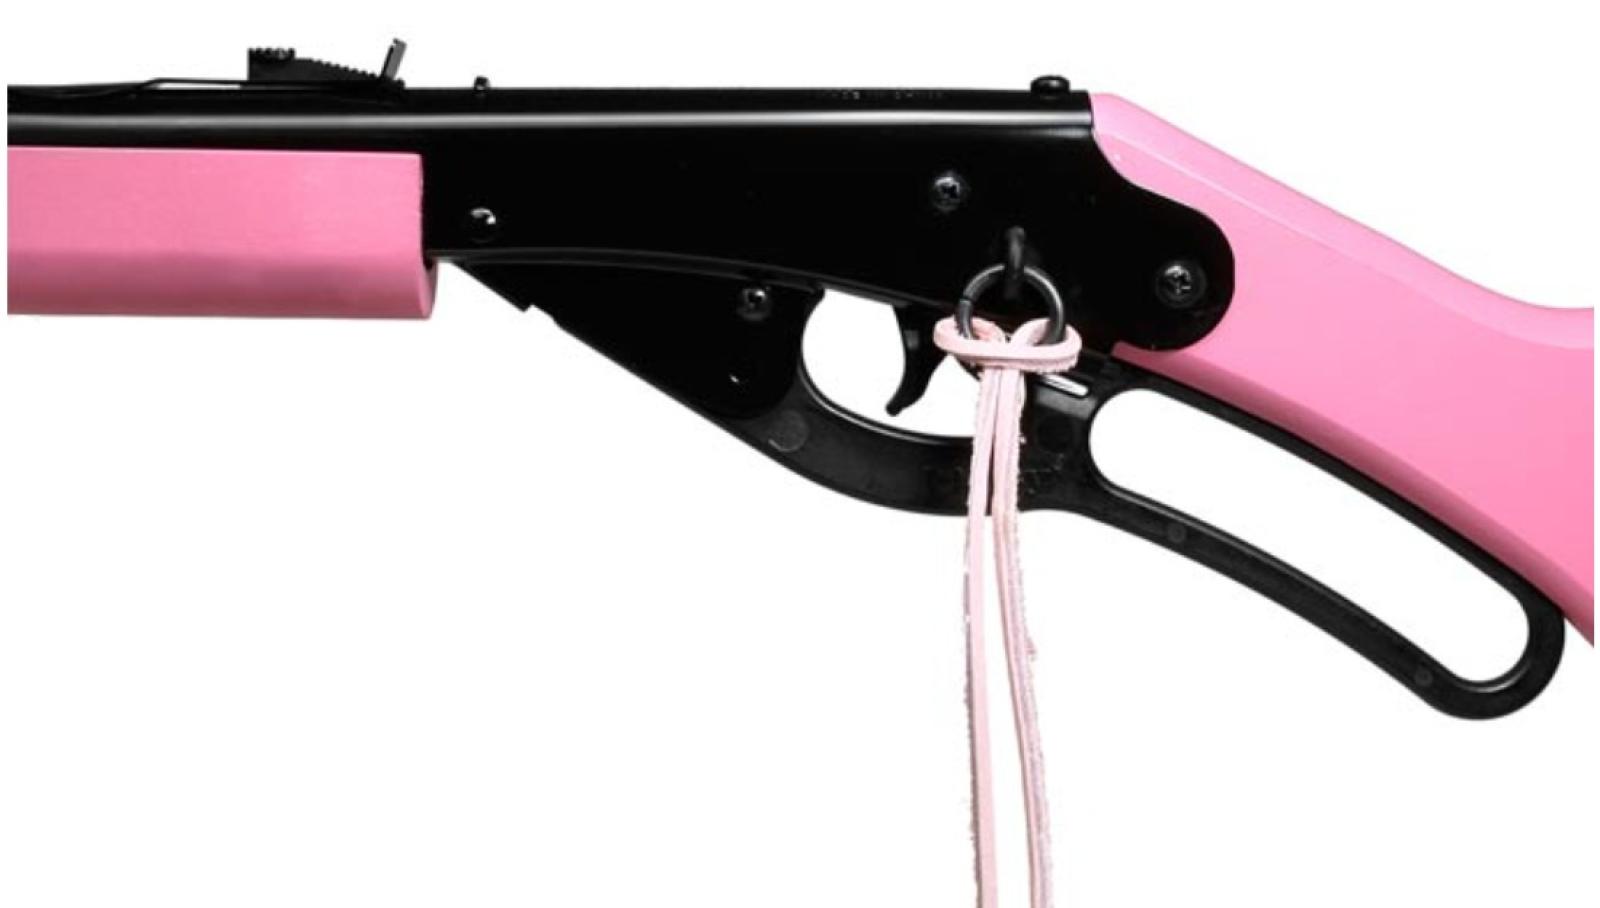 Daisy Red Ryder Fun Kit - Pink